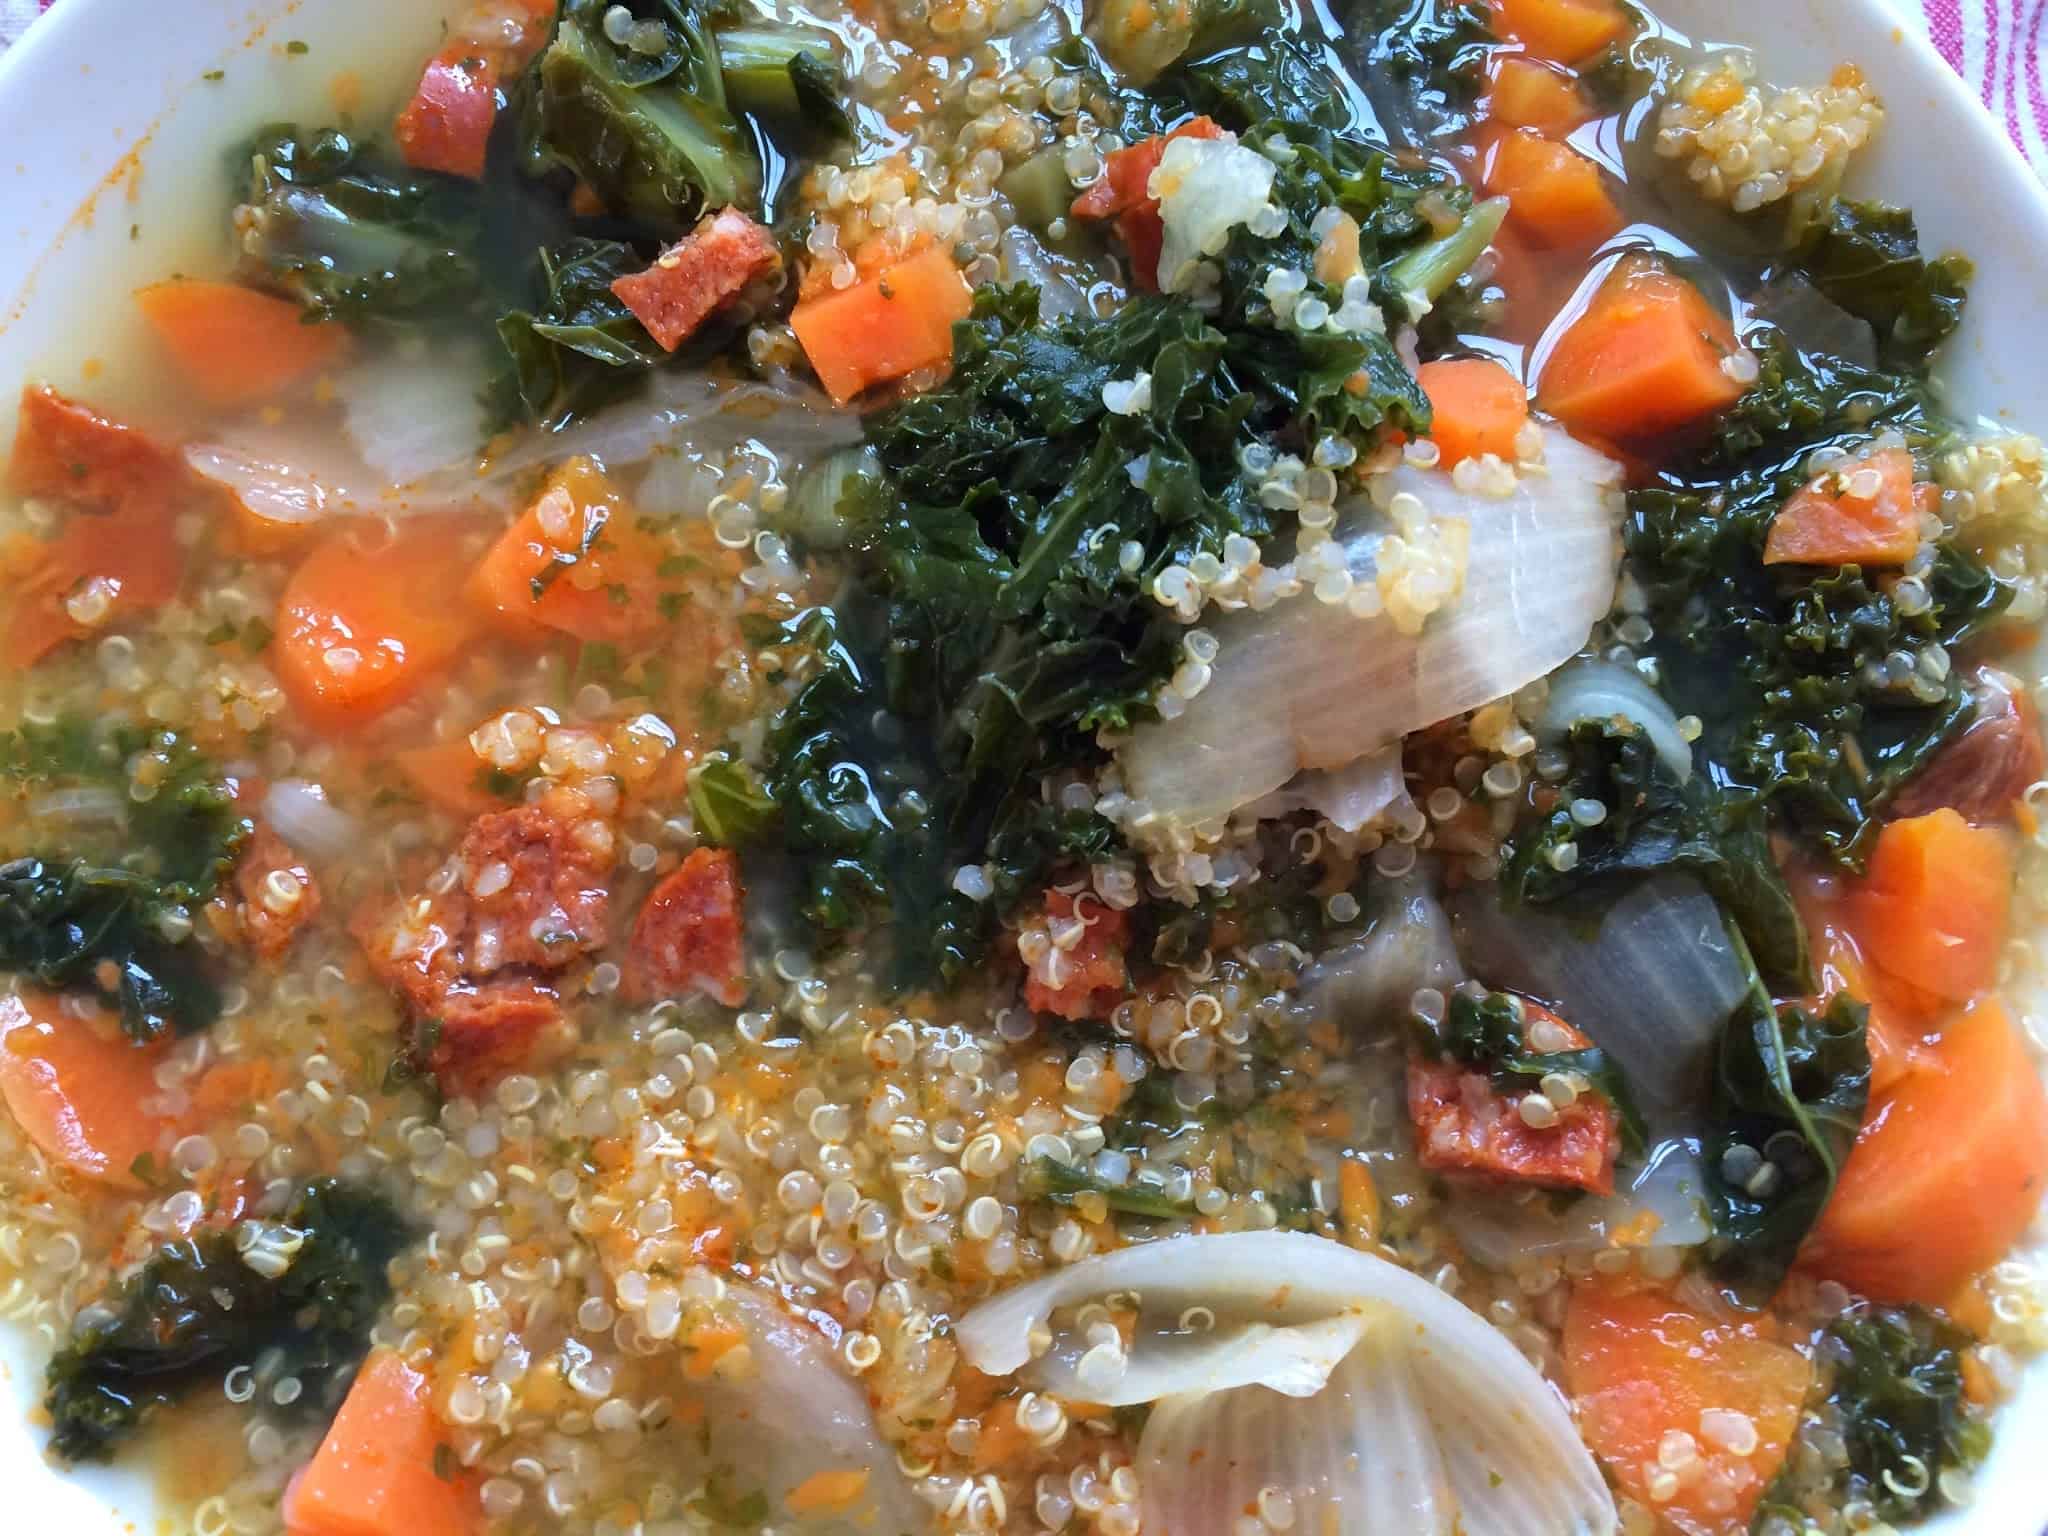 Feisty Tapas Thermomix Caldo cooked from scratch in the Thermomix, with kale, carrots and chorizo, this time served with quinoa